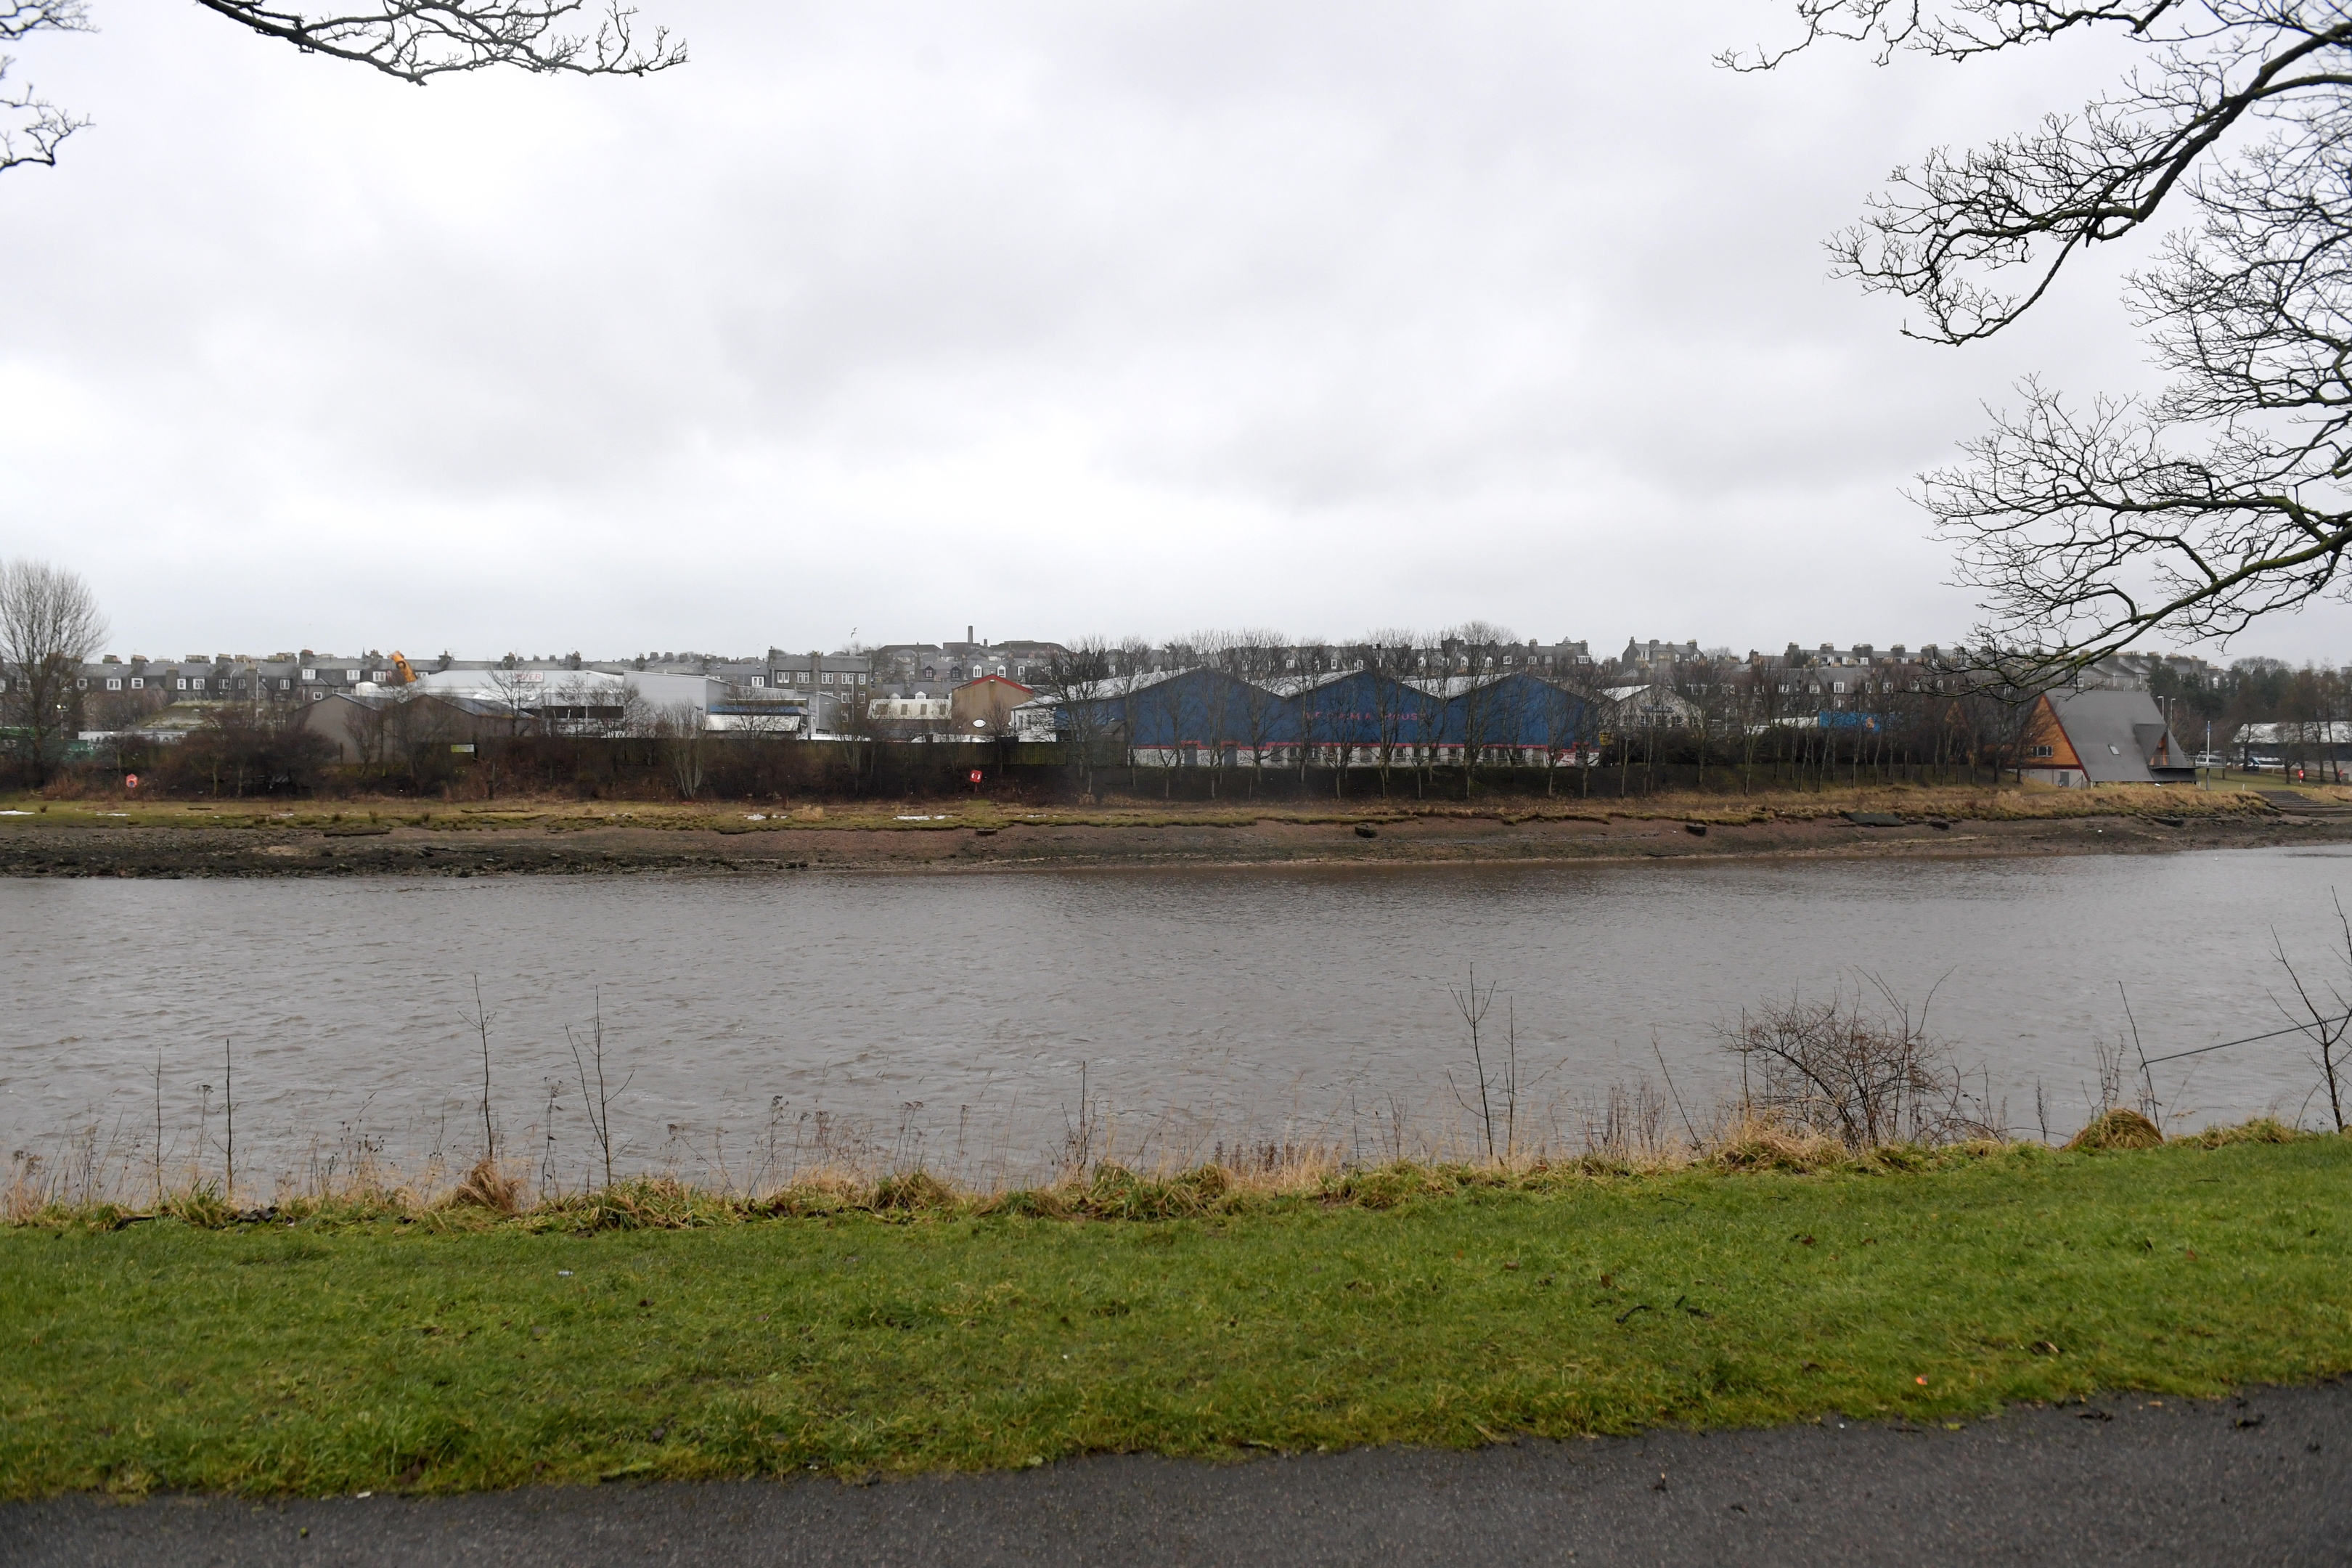 Land on the South side of the River Dee between Victoria Bridge and Aberdeen University Boat Club, where Aberdeen Harbour Group want to build houses. Photo taken fron North Esplanade West.
06/03/18.
Picture by KATH FLANNERY